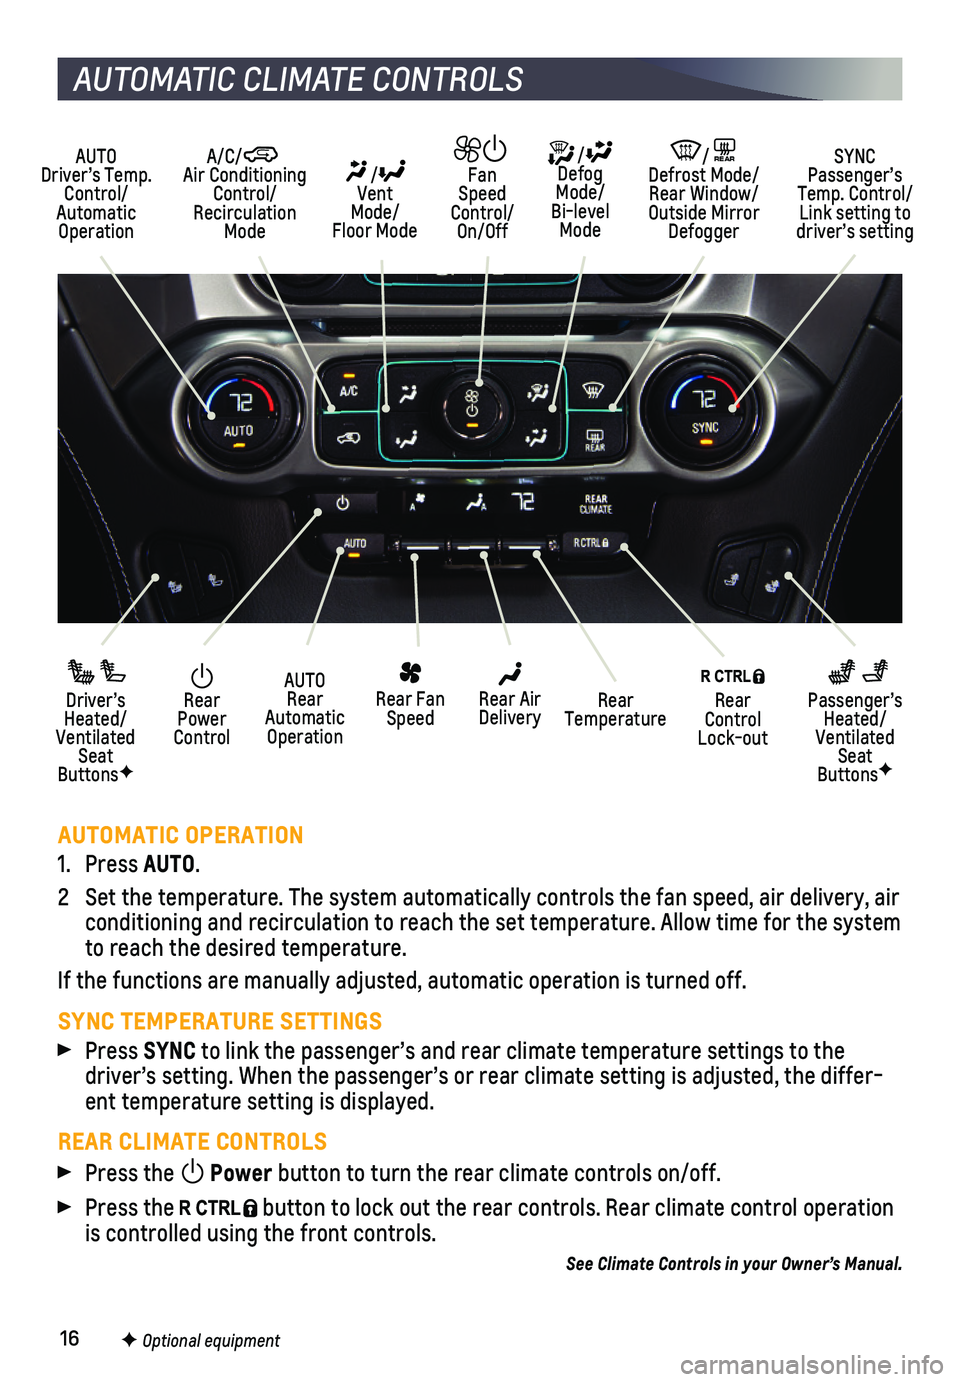 CHEVROLET SUBURBAN 2018  Get To Know Guide 16
AUTOMATIC OPERATION
1. Press AUTO.
2 Set the temperature. The system automatically controls the fan speed, ai\
r delivery, air conditioning and recirculation to reach the set temperature. Allow tim